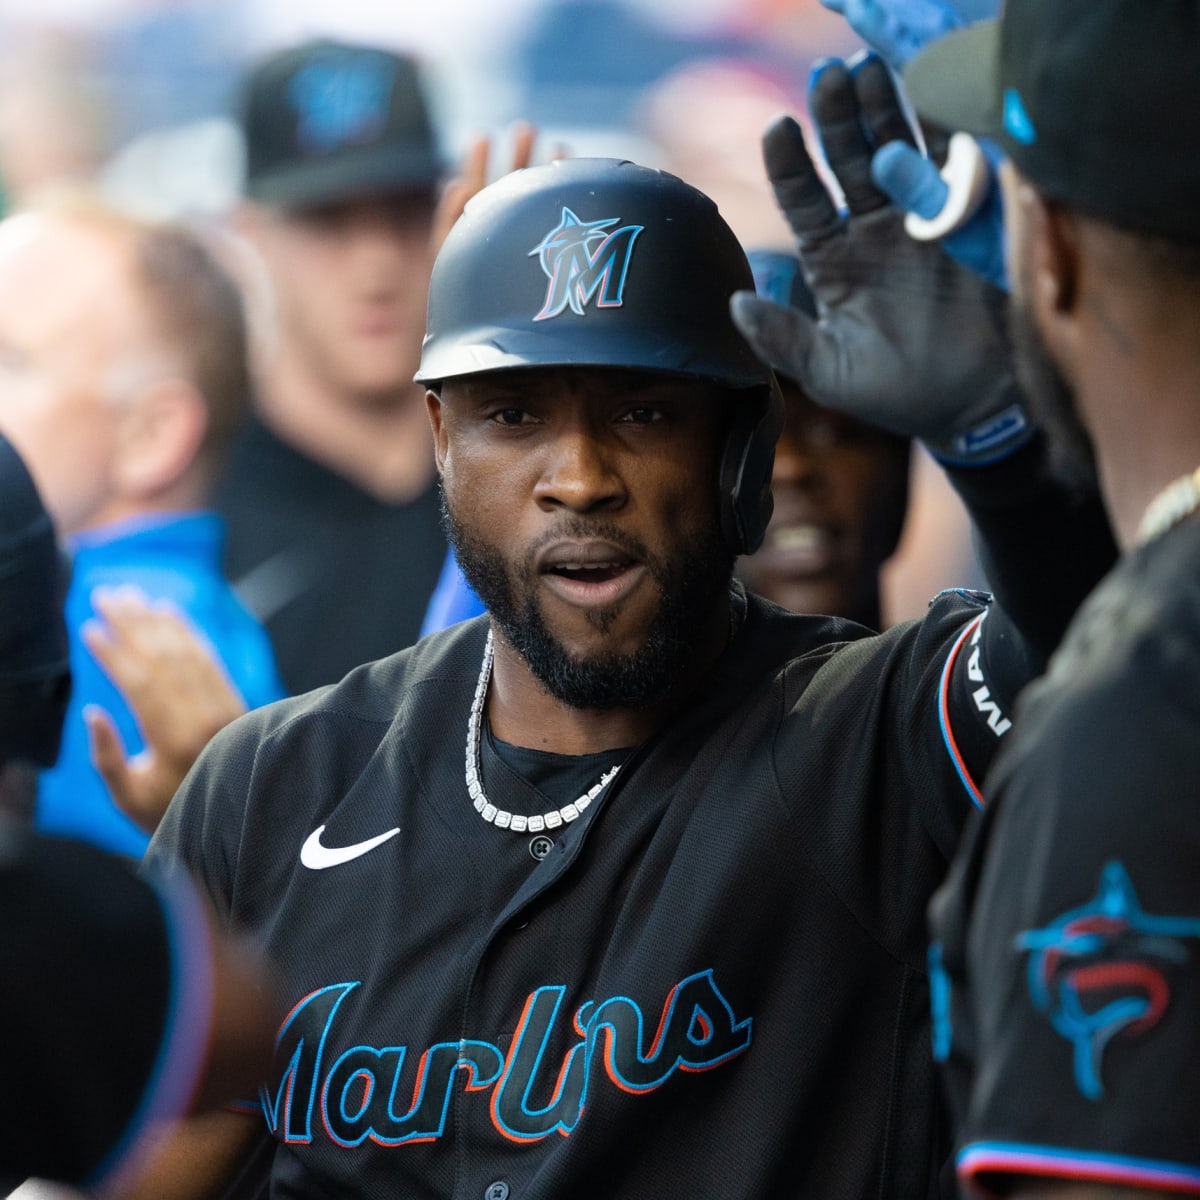 New York Yankees show interest in Miami Marlins CF Starling Marte